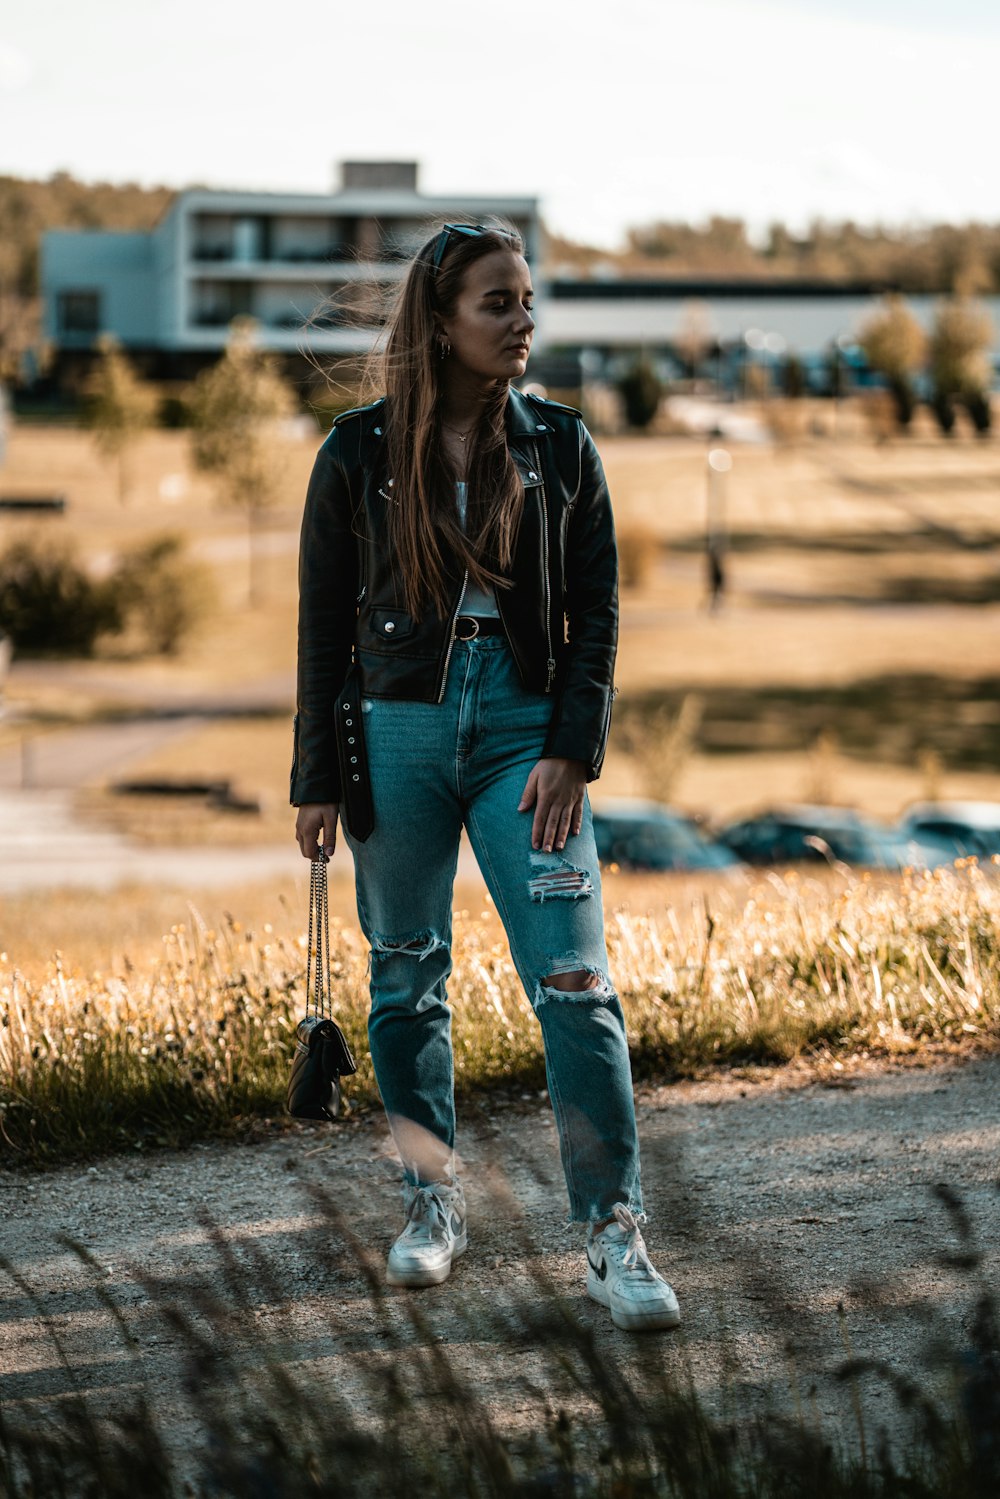 Woman in black leather jacket and blue denim jeans walking on dirt road  during daytime photo – Free Deutschland Image on Unsplash